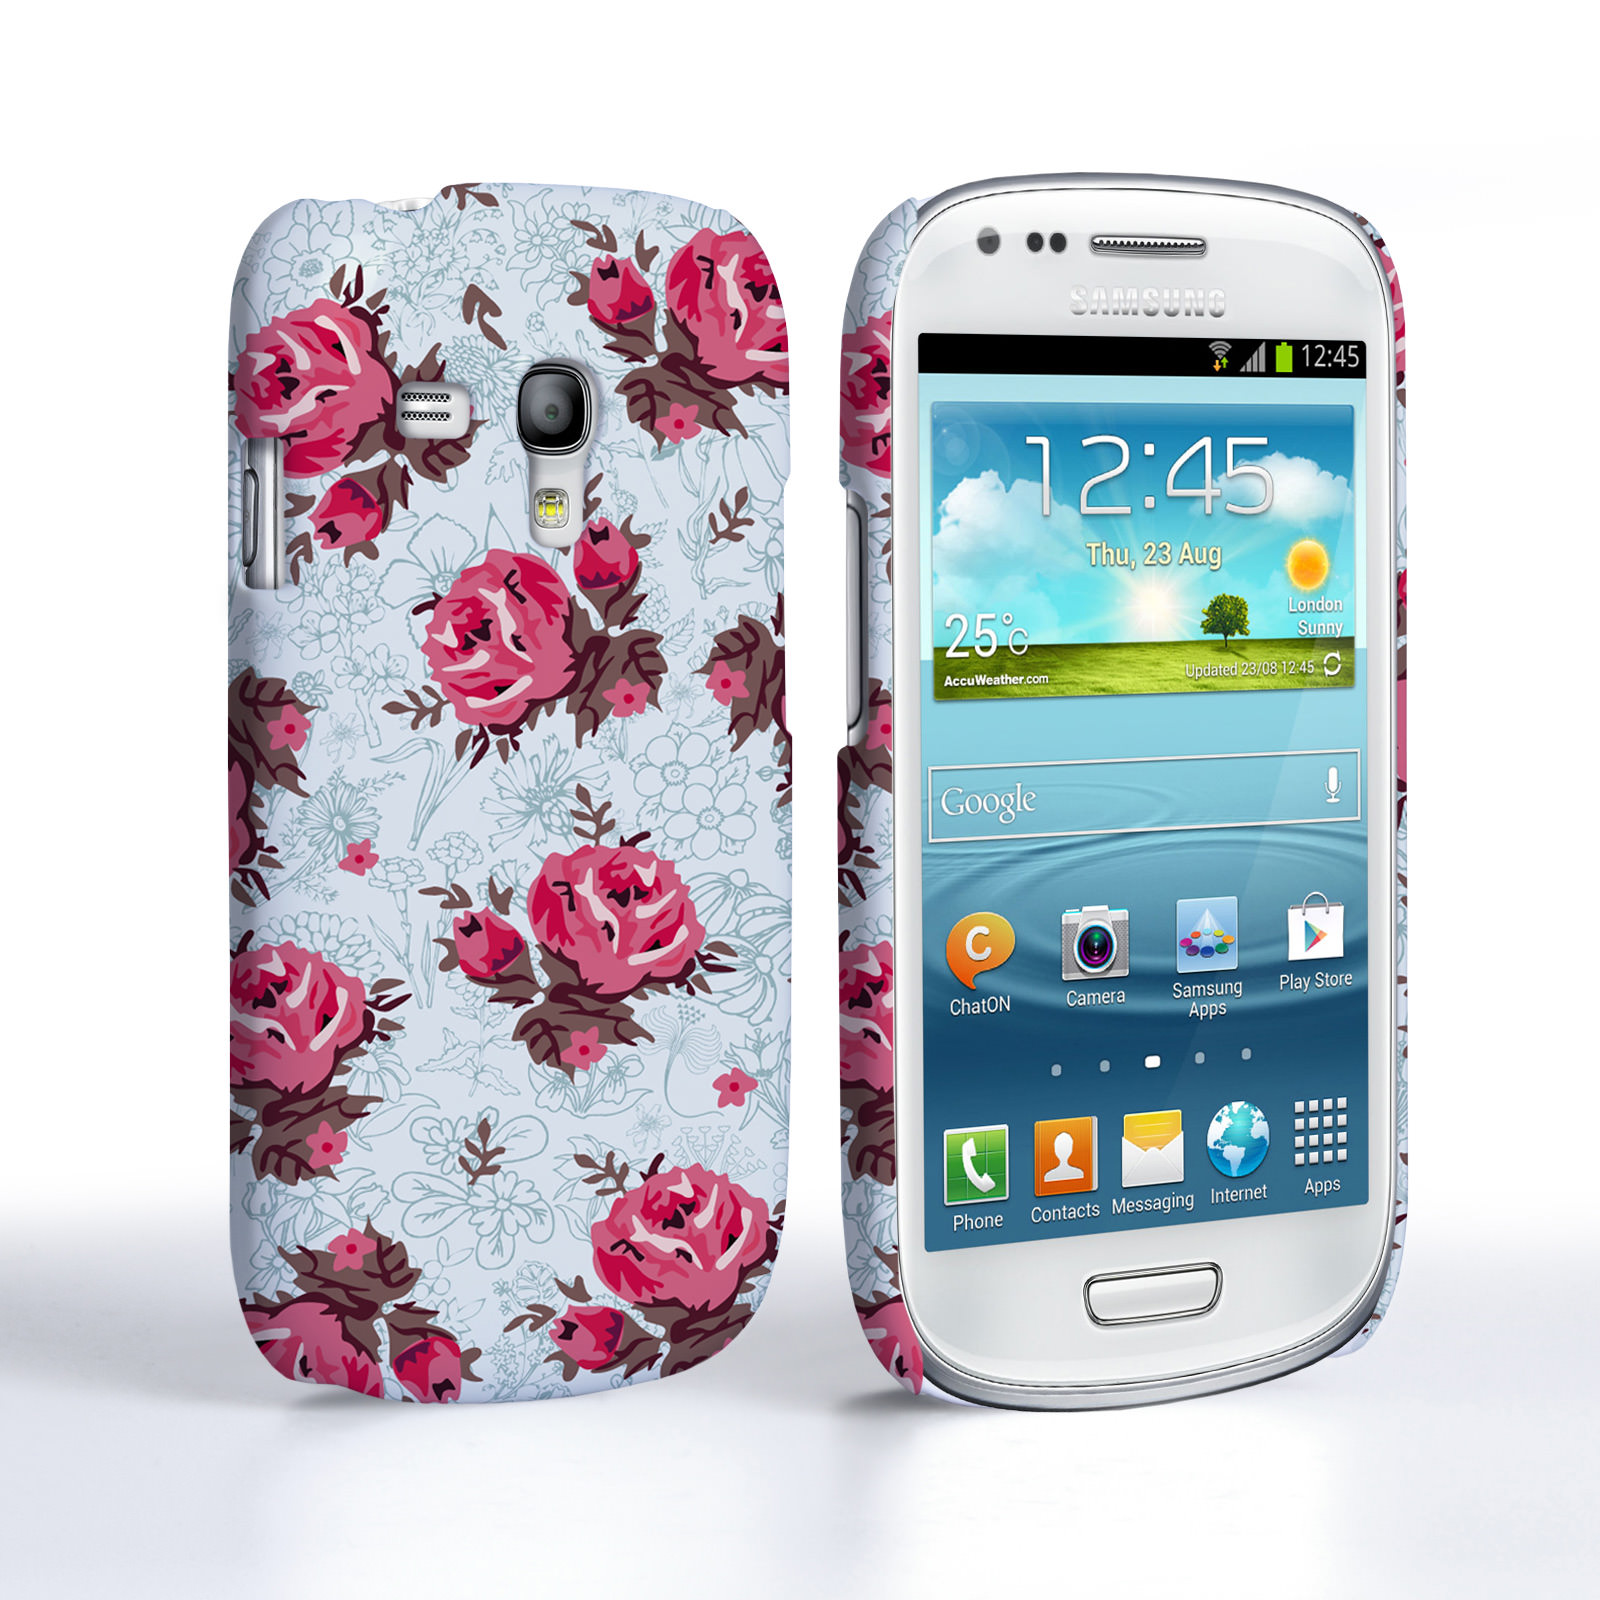 samsung galaxy s3 mini wallpaper,mobile phone case,mobile phone,gadget,communication device,mobile phone accessories